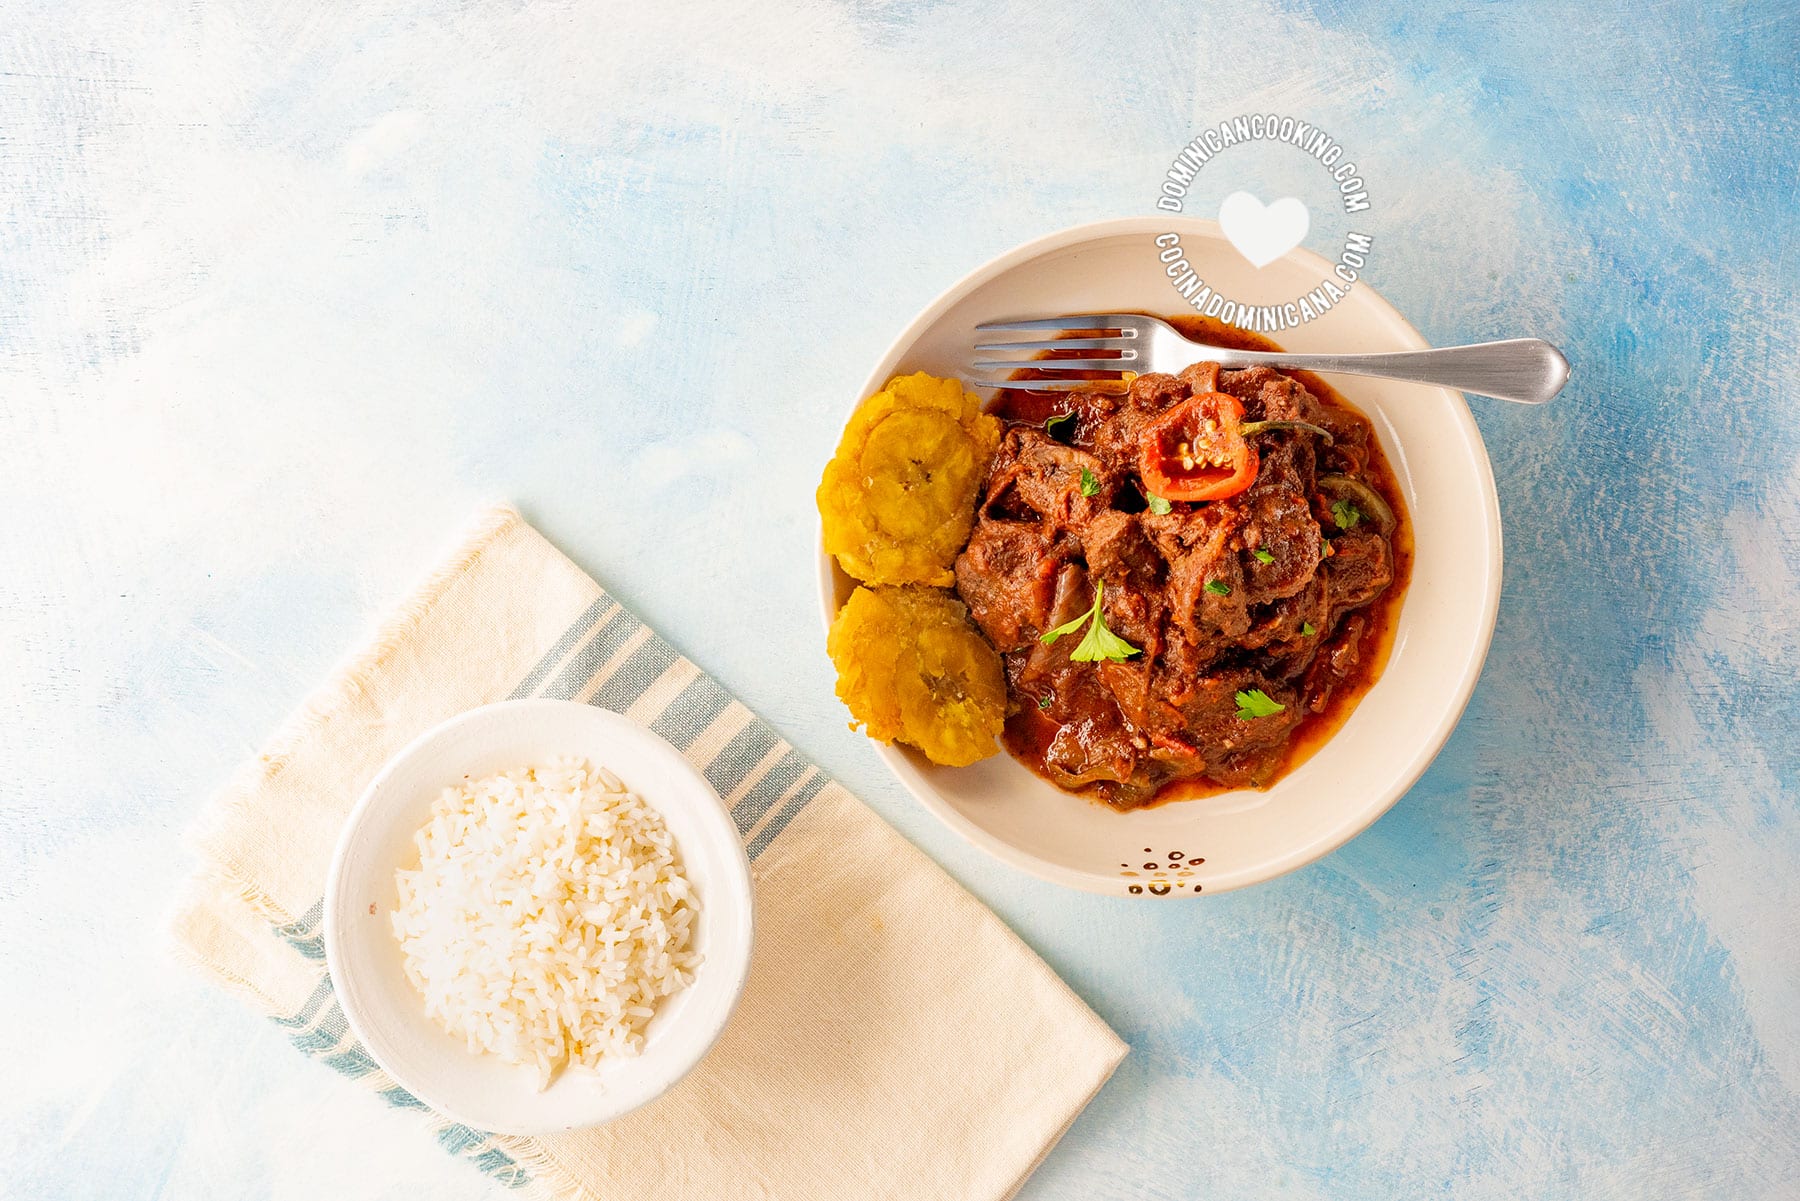 Chivo Guisado Picante Recipe (Spicy Goat Meat Stew) served with rice